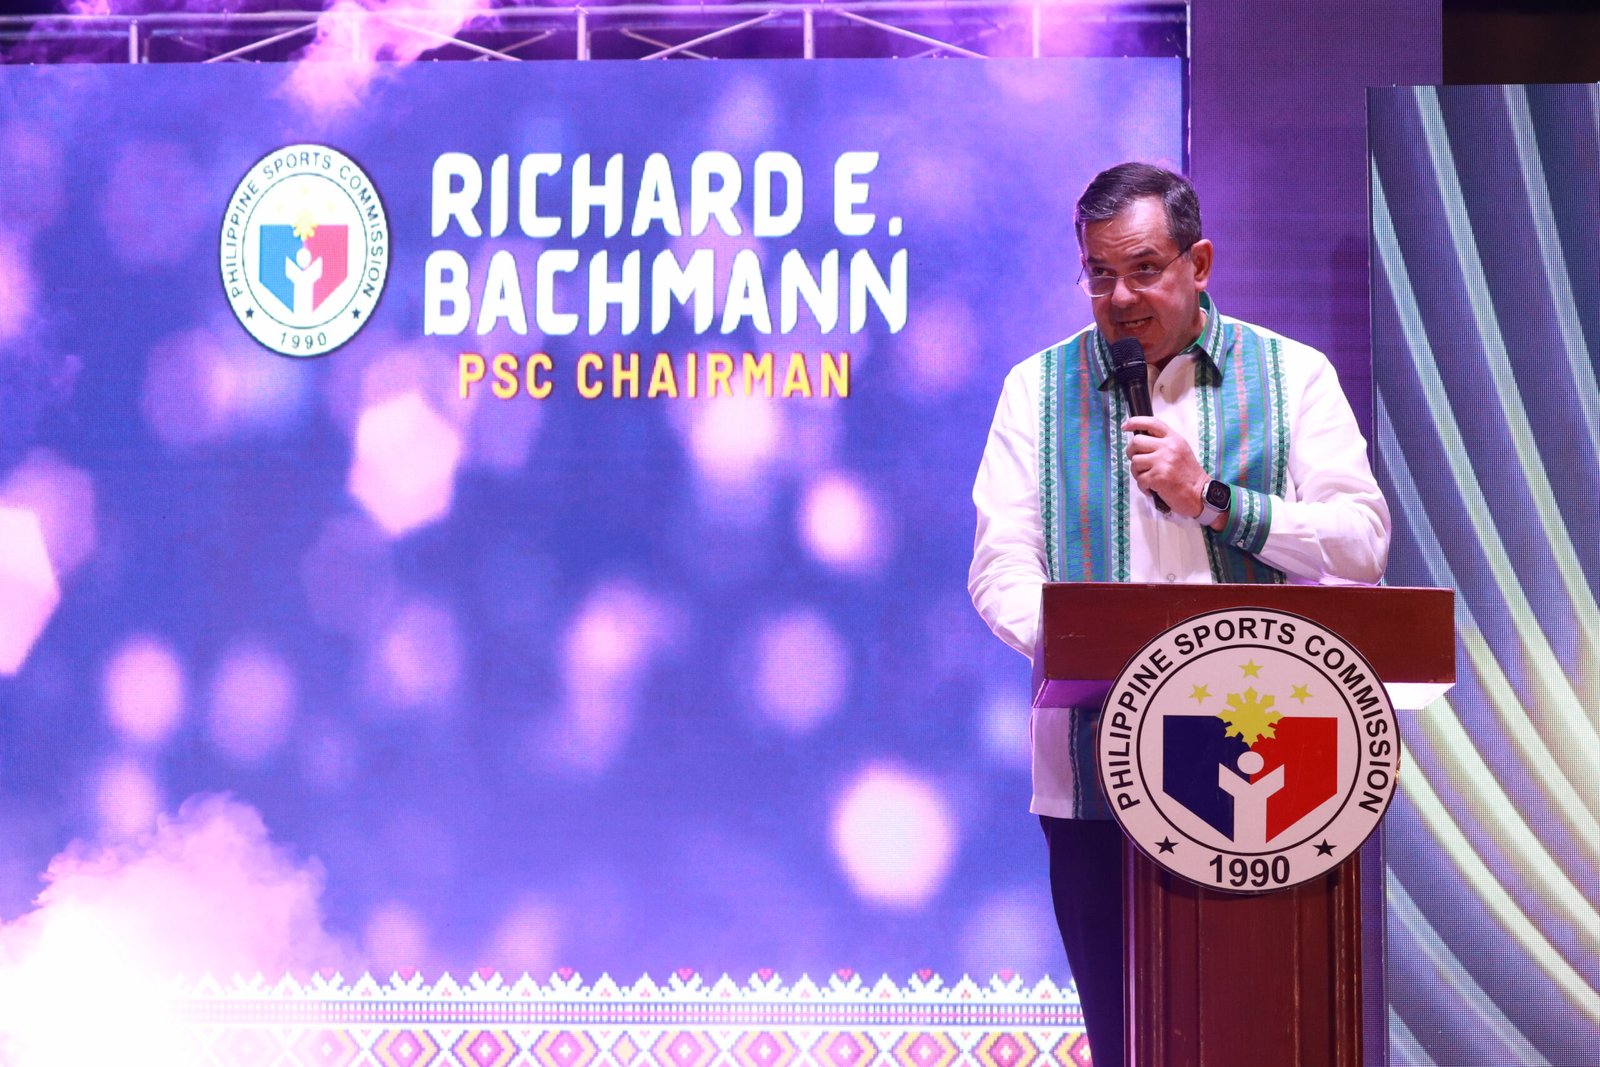 Bachmann cites women athletes’ role in successful PH sports agenda